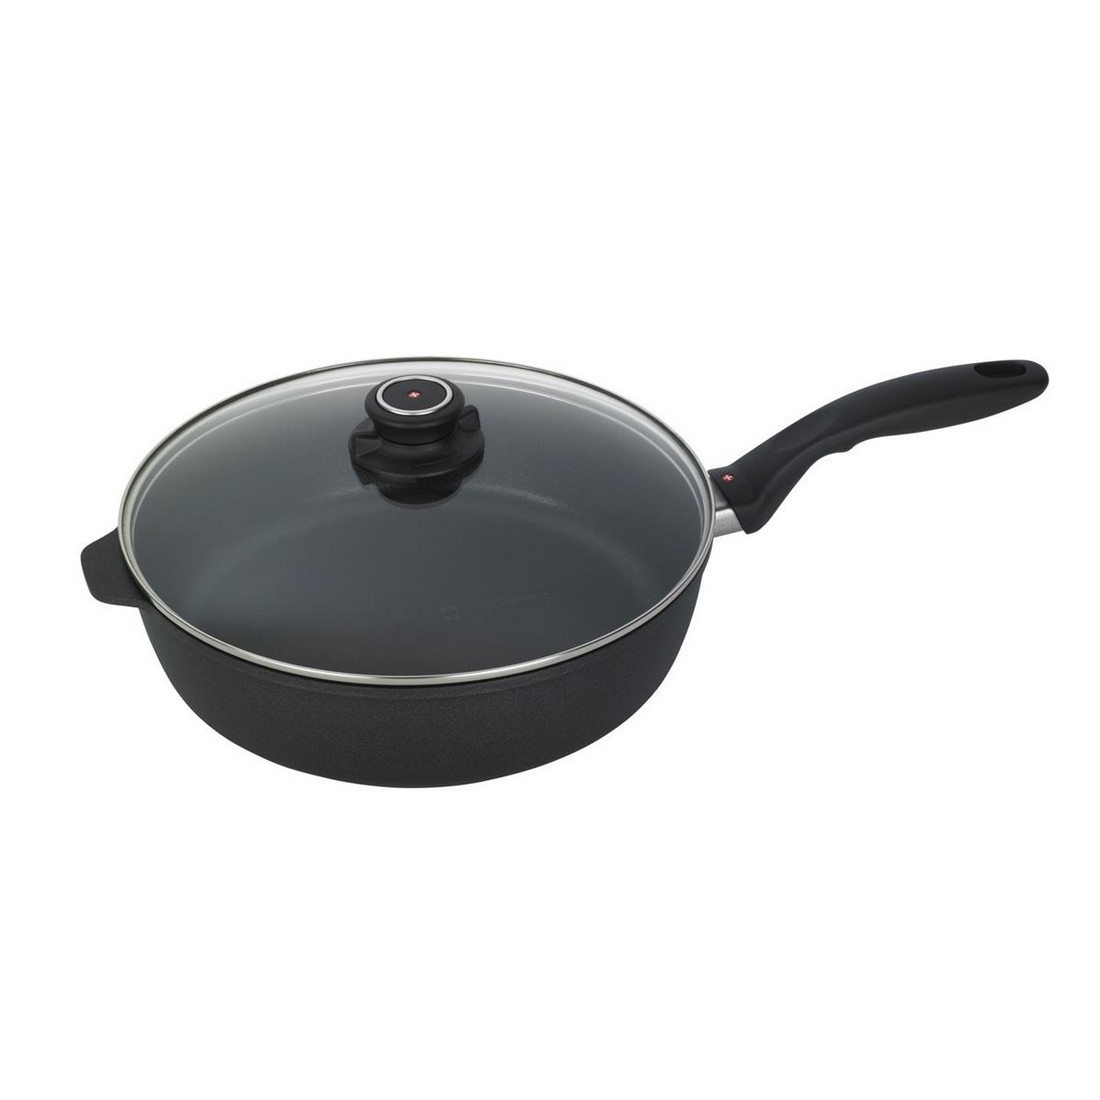 Swiss Diamond - XD 4.1 L Non-Stick Frying Pan - 28 cm with Glass Lid - Induction